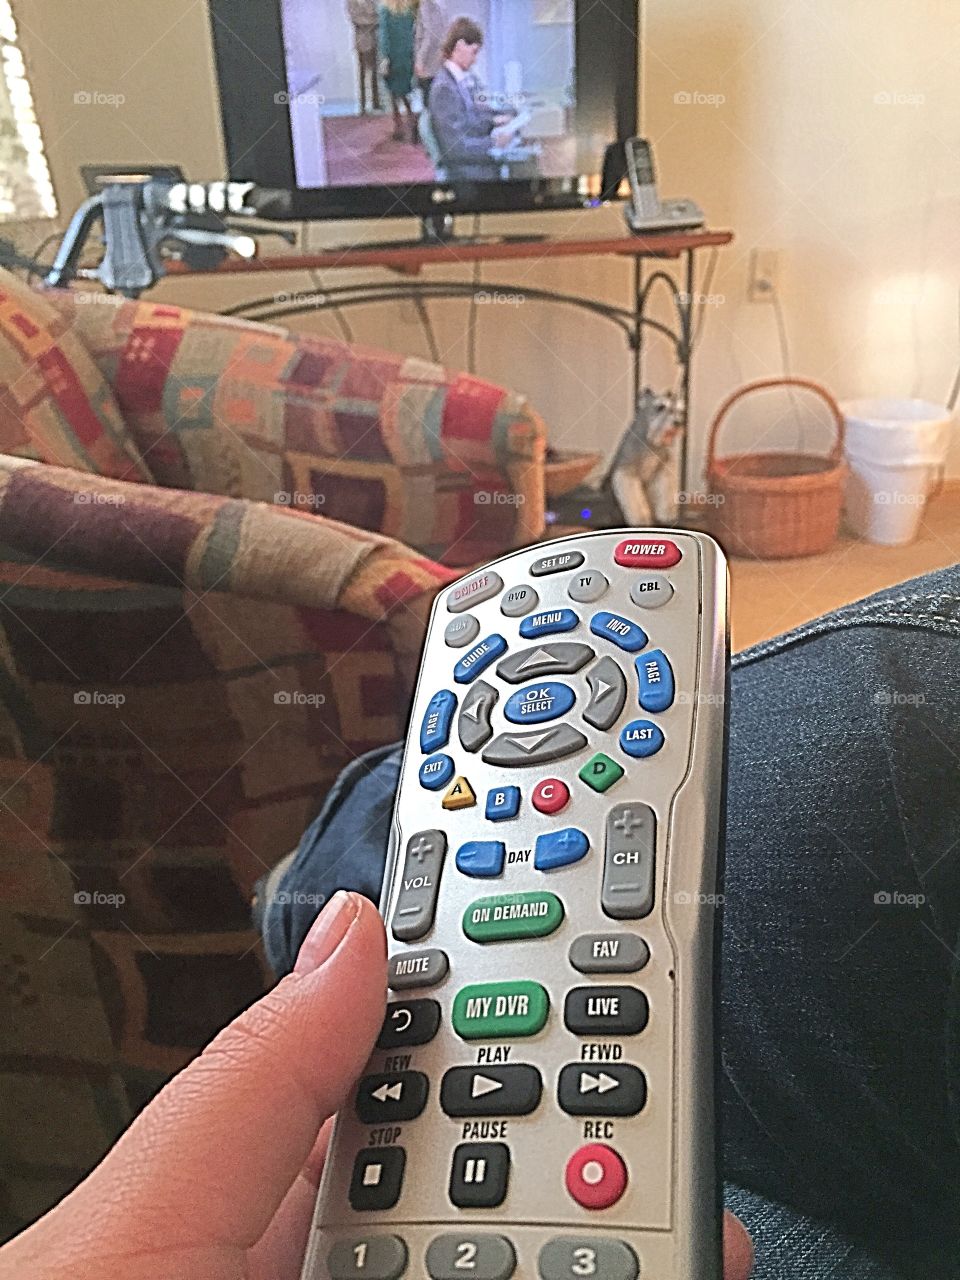 When you have the remote you have the power!